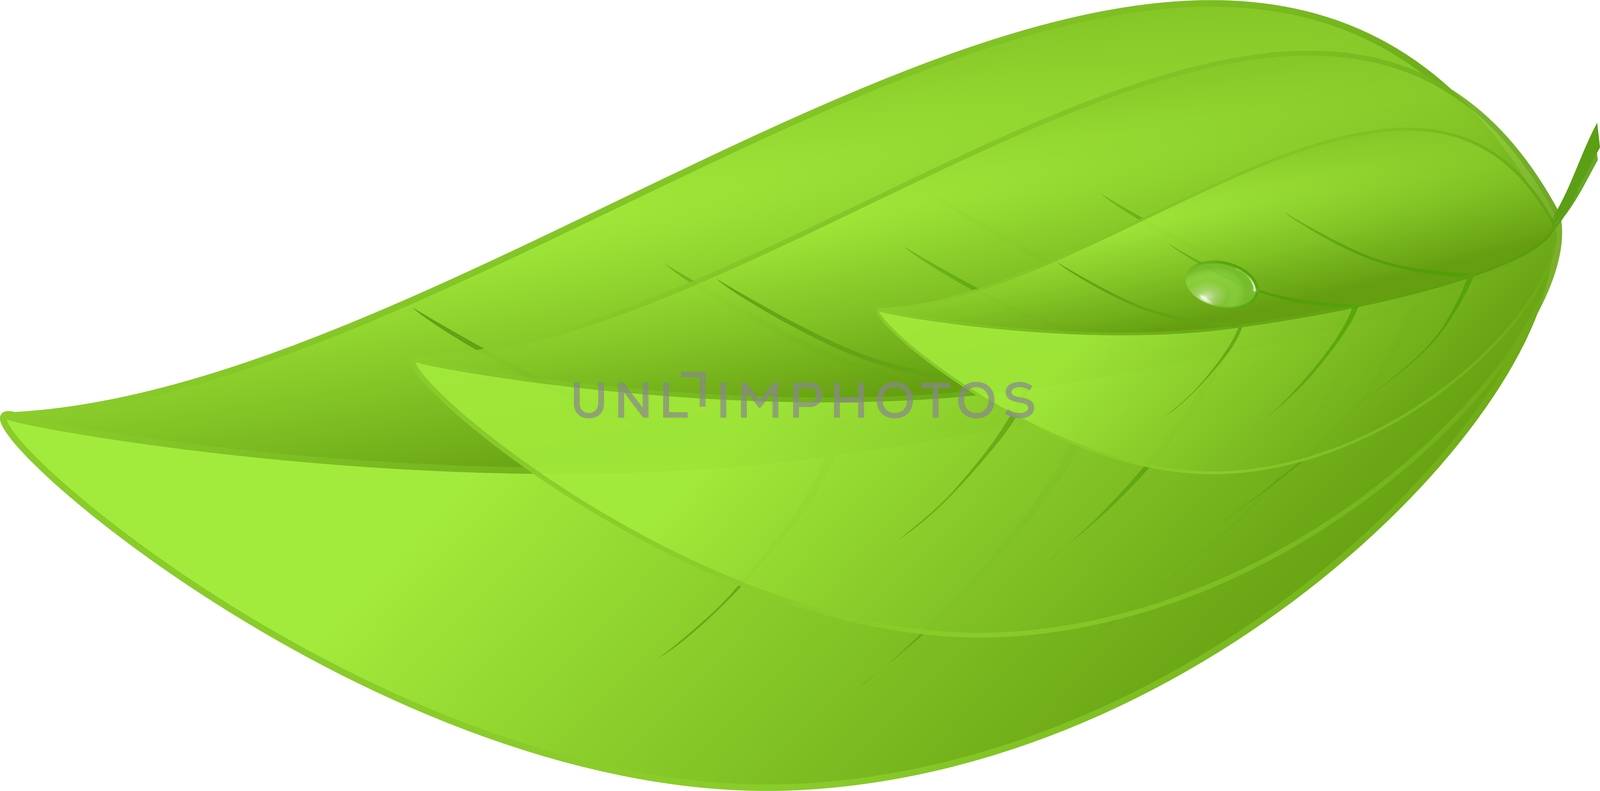 Eco icon green three leaves natural illustration isolated on a white background